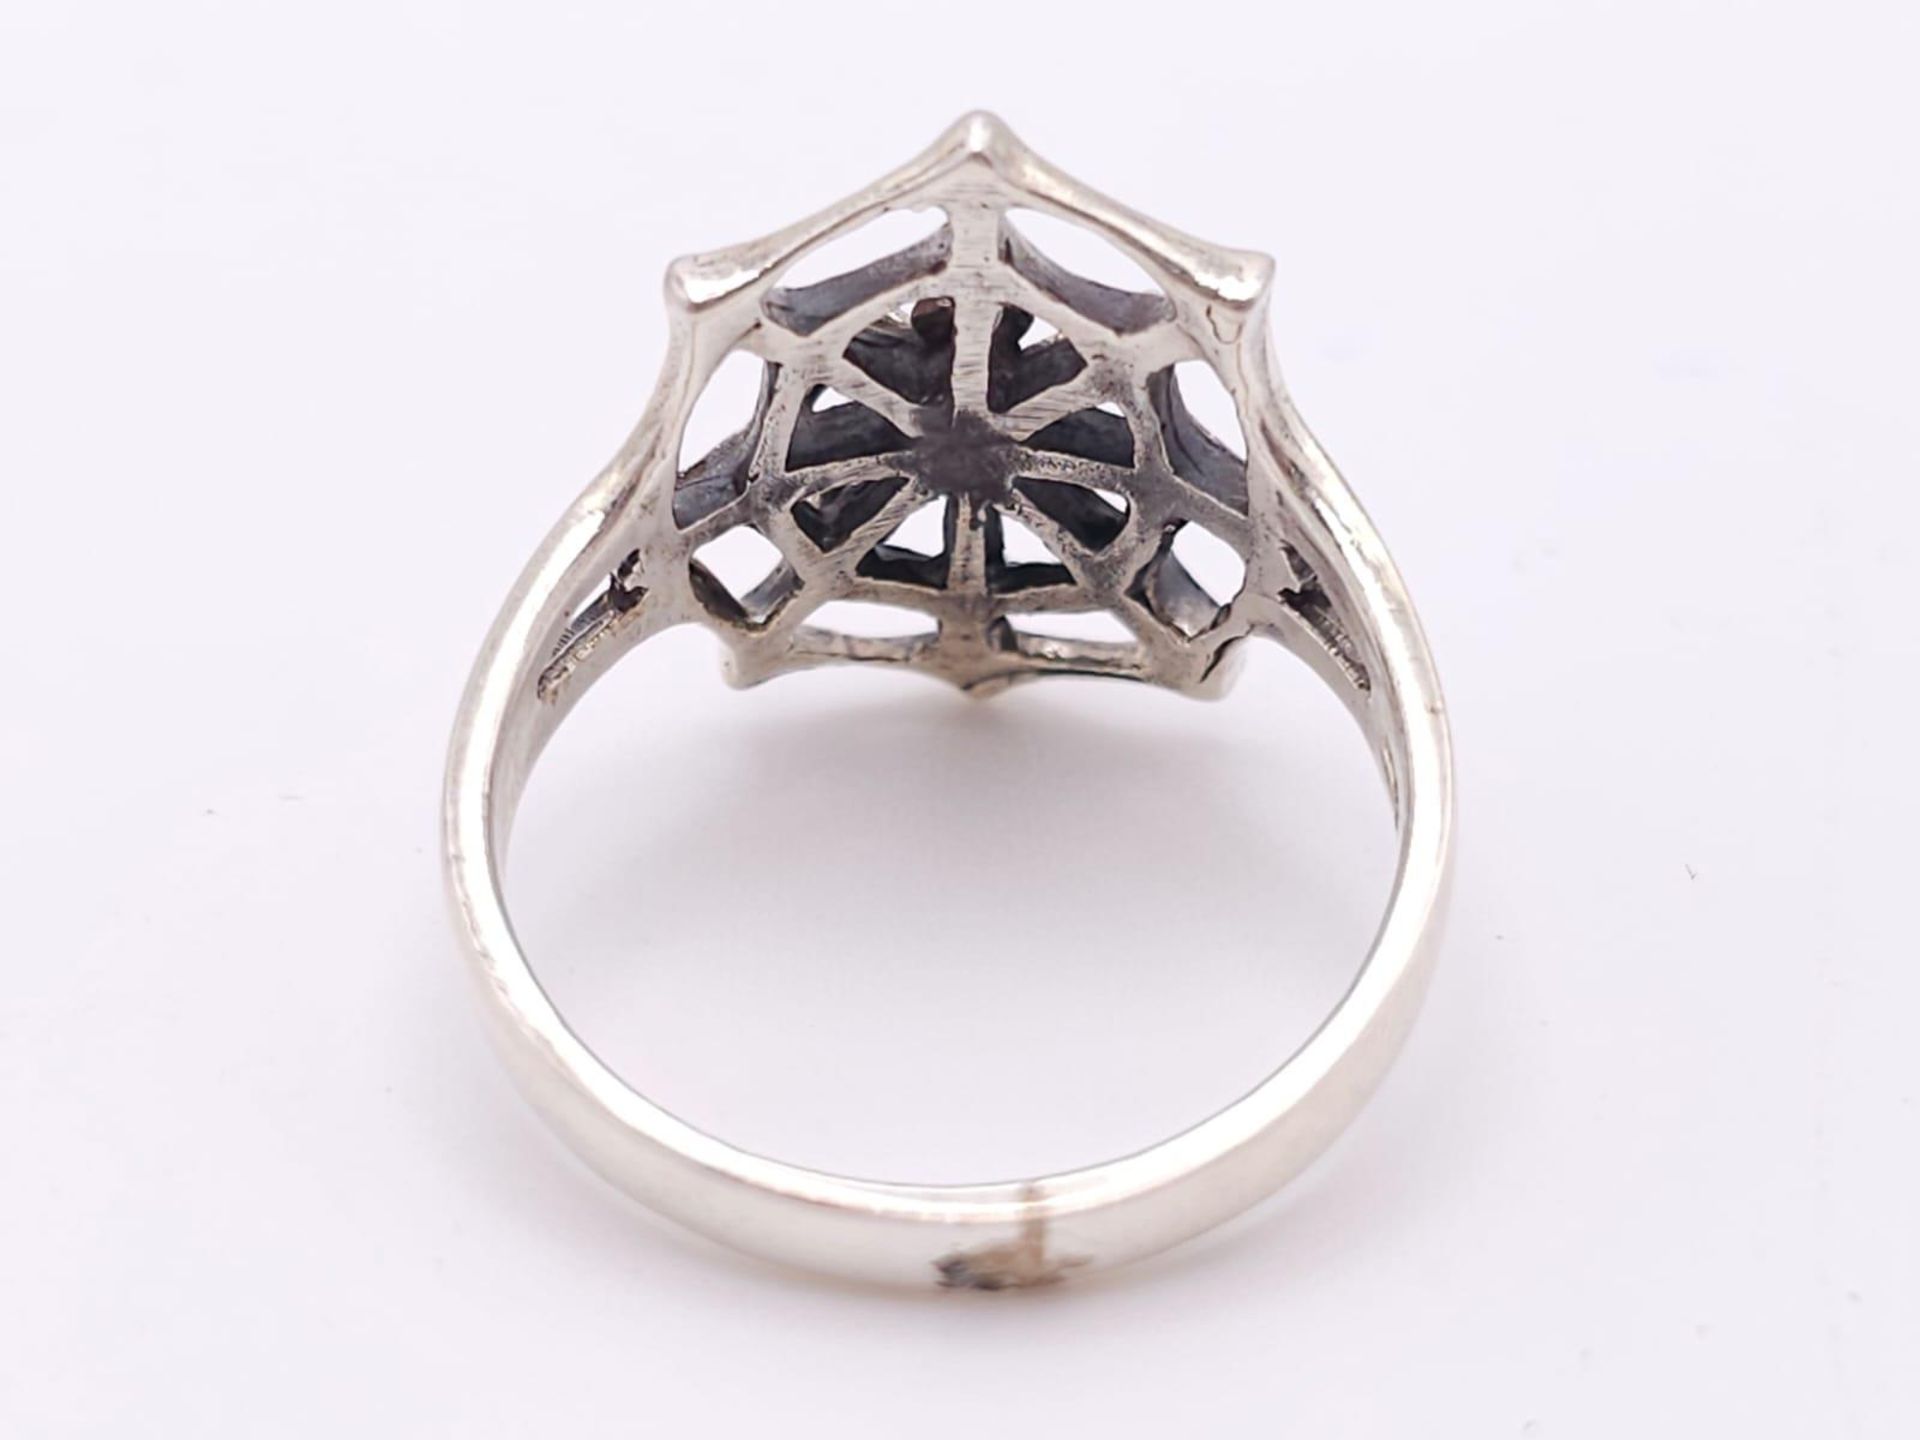 A Unique Vintage Sterling Silver Spider and Spider Web Ring Size Q. The Crown Measures 2cm Long - Image 6 of 9